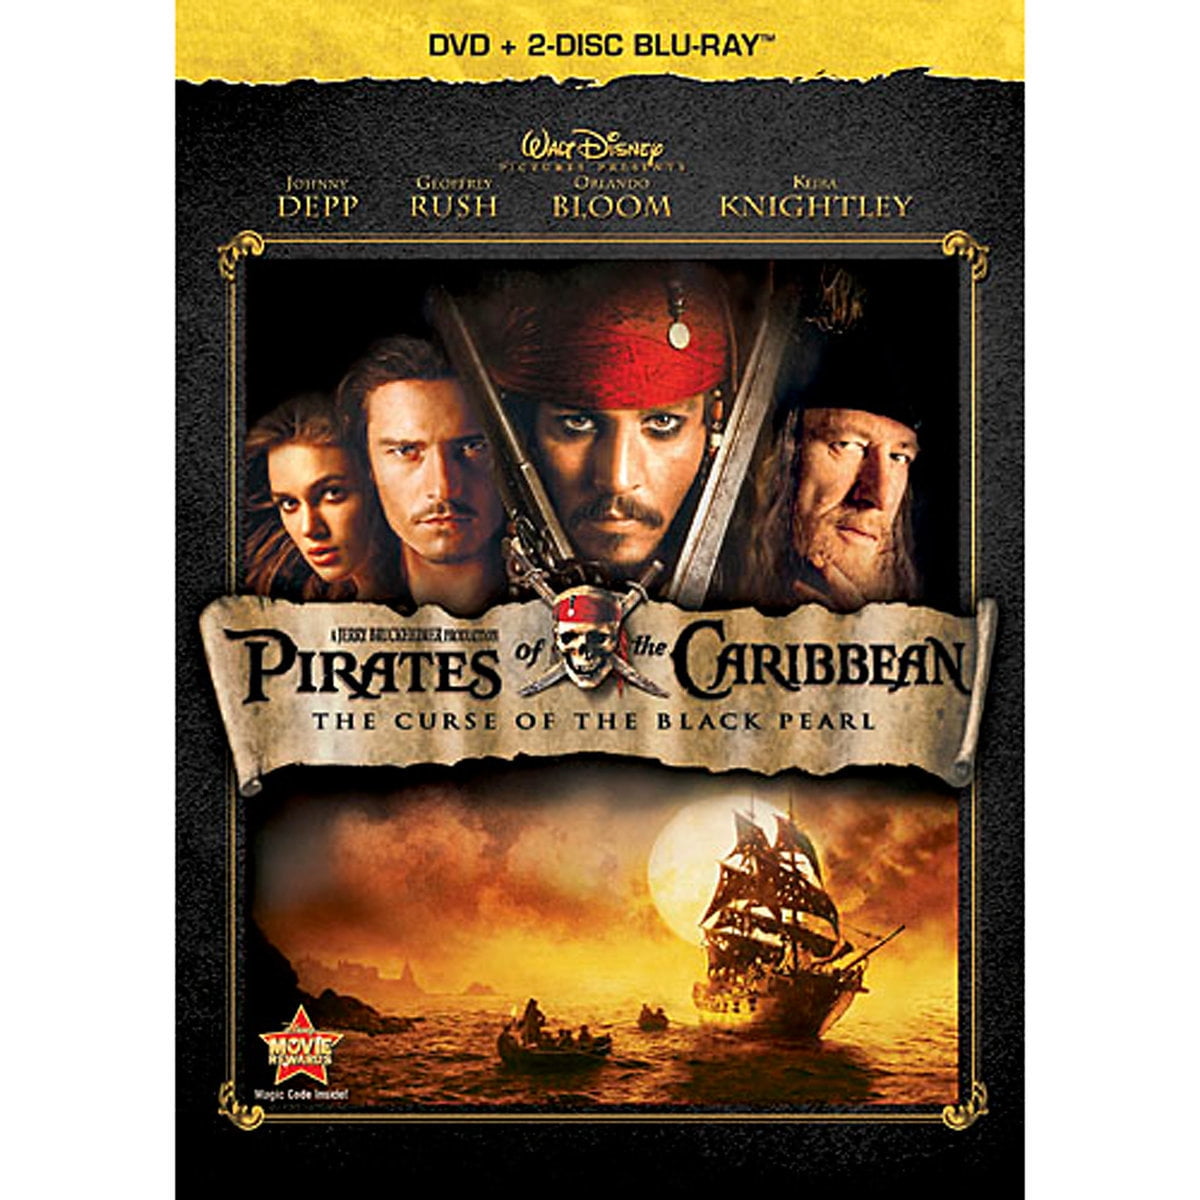 PIRATES OF THE CARIBBEAN: AT WORLD'S END & SLEEPY HOLLOW 2-DVD Bundle Used